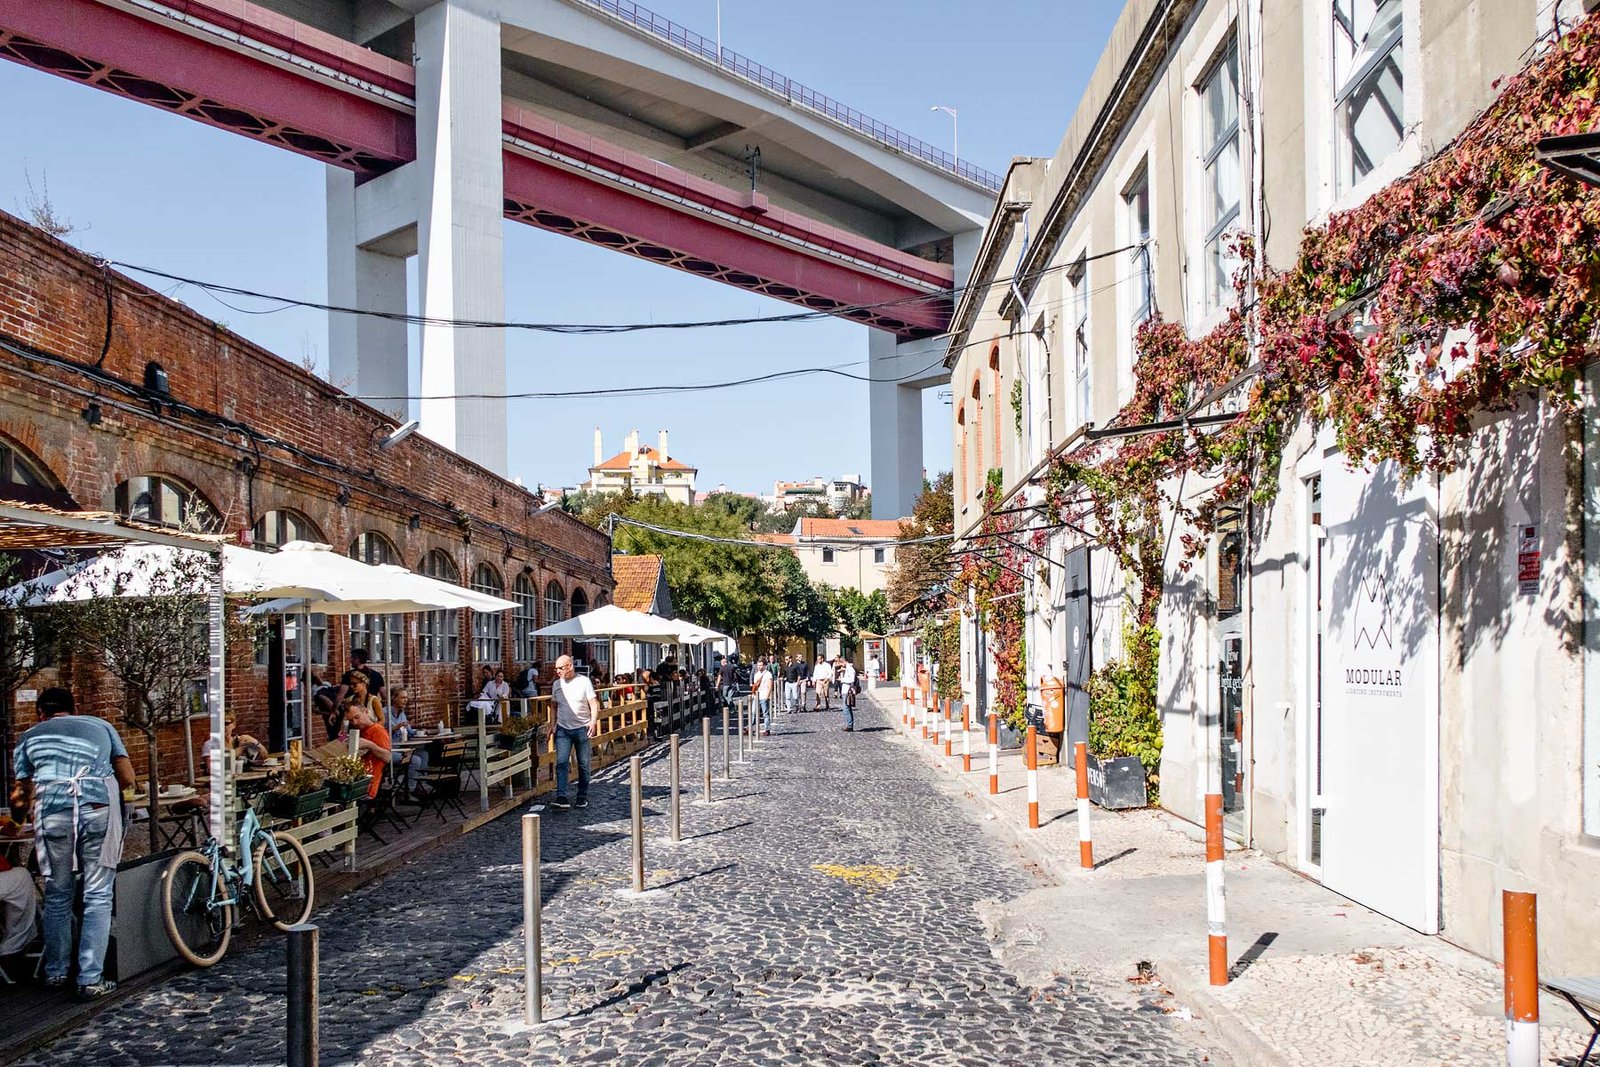 Lisbon in 3 days: 10x places to visit & shopping in Lisbon - LX Factory. Industrial and creative area with cool shops, art galleries and nice restaurants